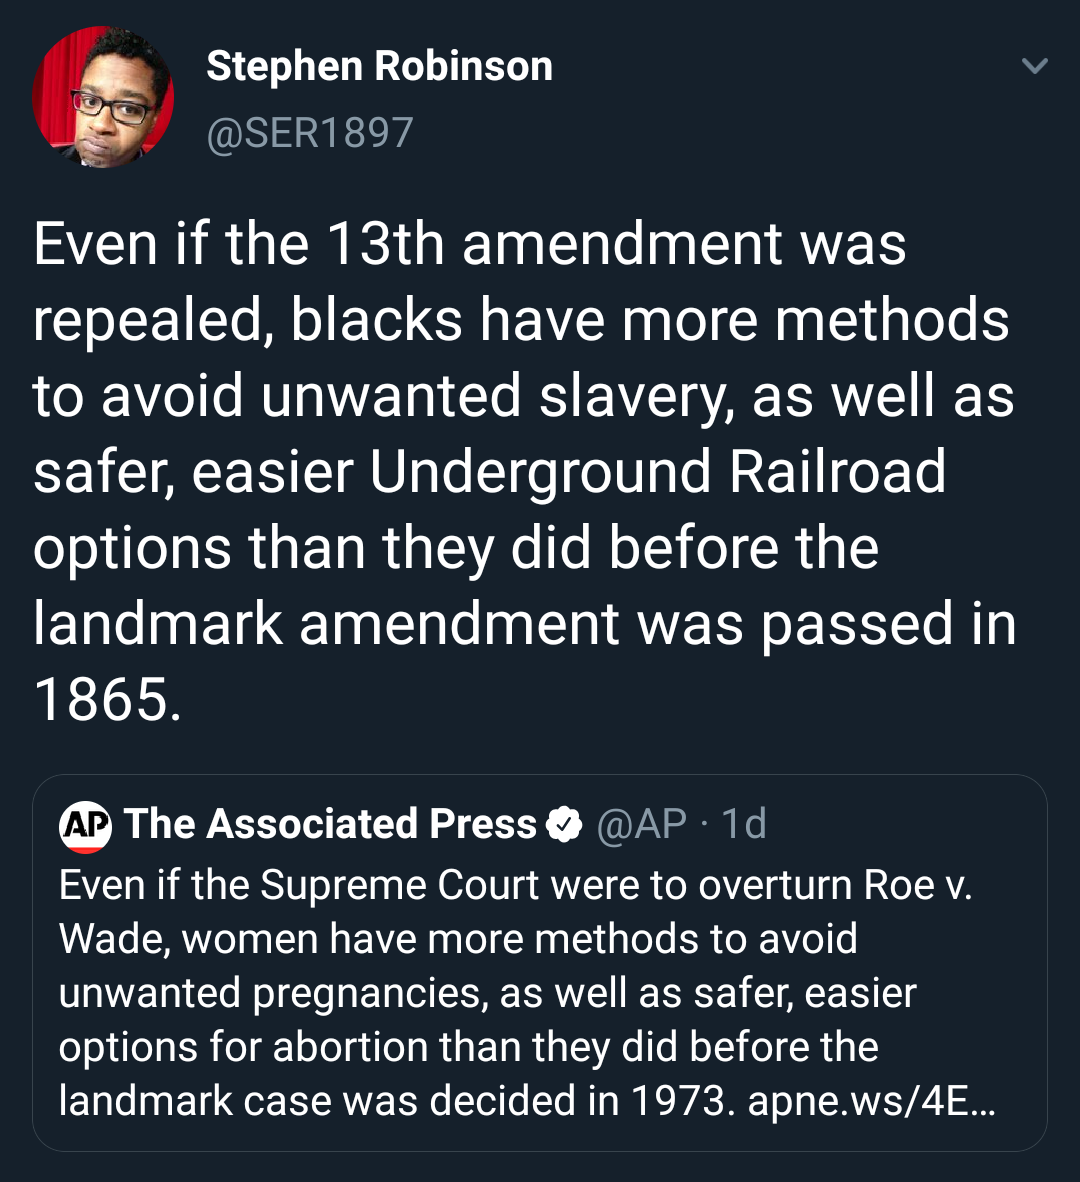 material - Stephen Robinson Even if the 13th amendment was repealed, blacks have more methods to avoid unwanted slavery, as well as safer, easier Underground Railroad options than they did before the landmark amendment was passed in 1865. Ap The Associate